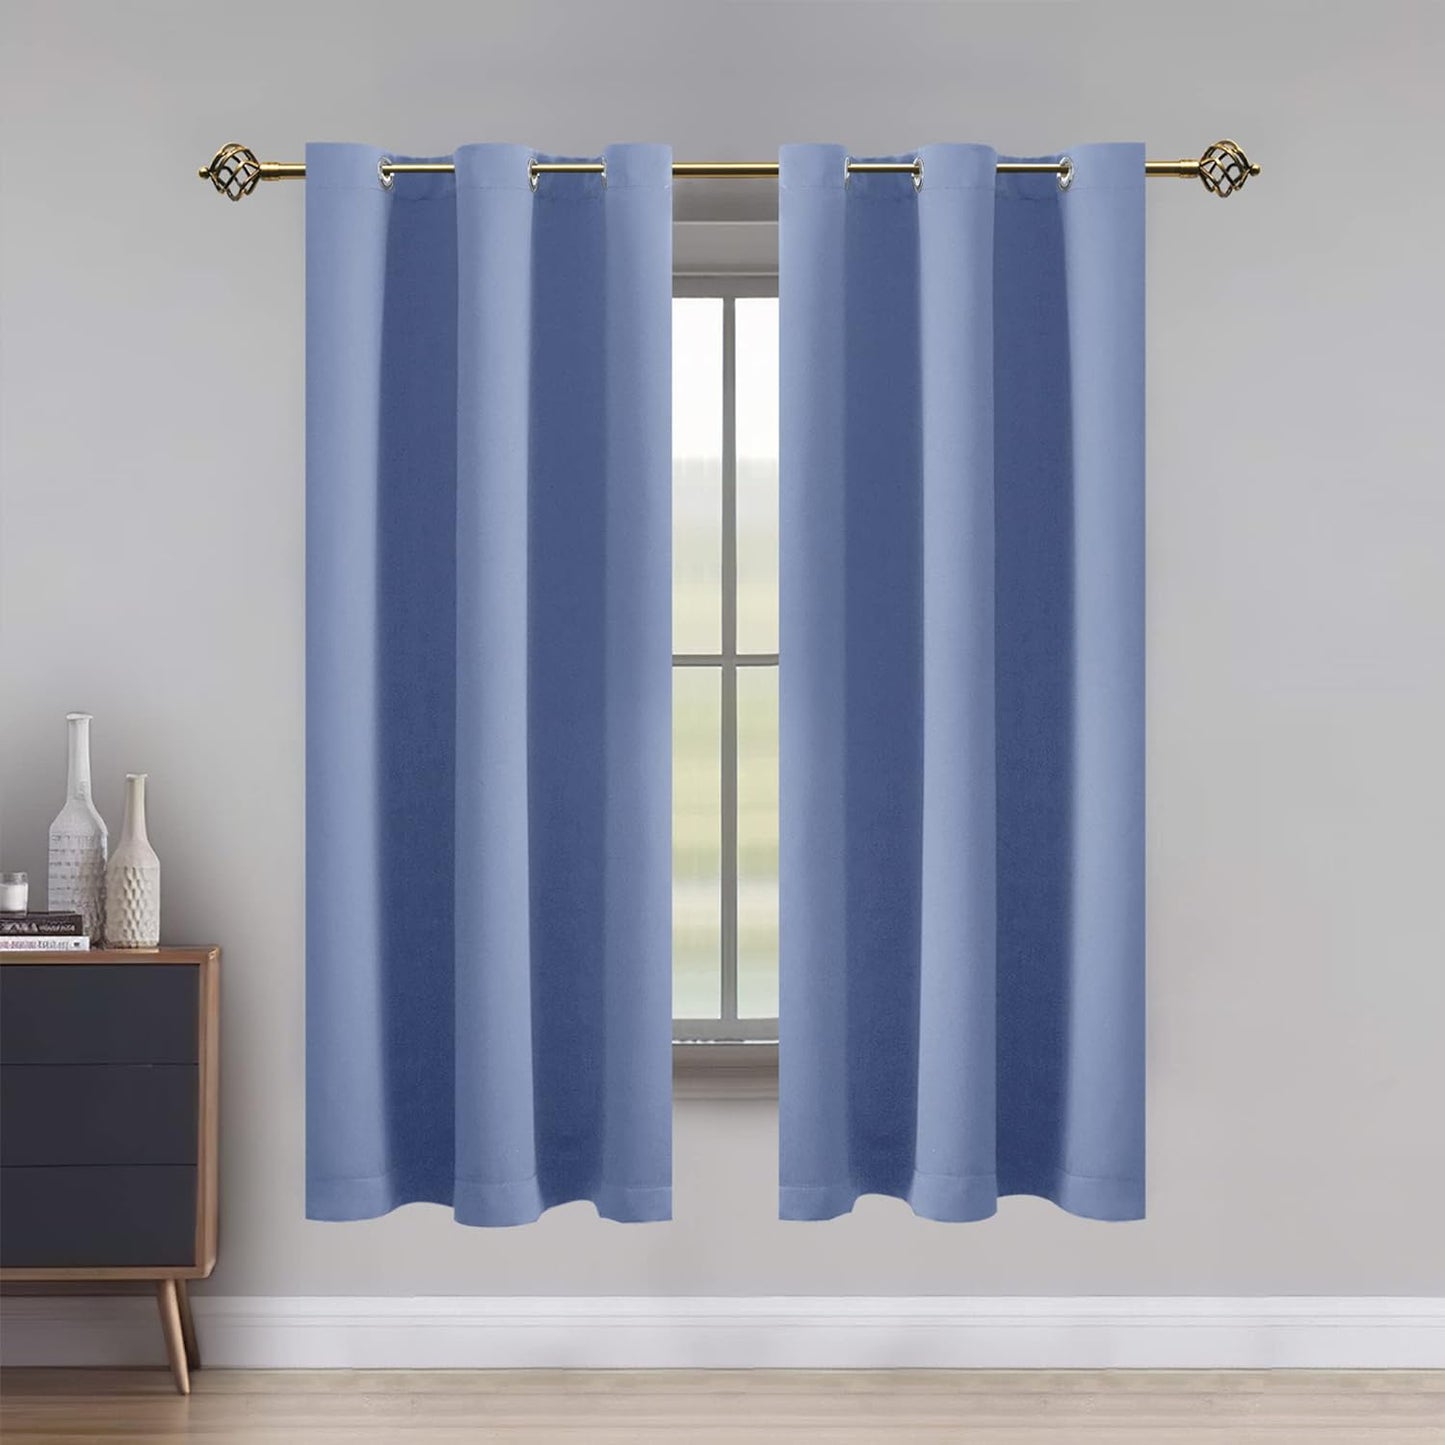 LUSHLEAF Blackout Curtains for Bedroom, Solid Thermal Insulated with Grommet Noise Reduction Window Drapes, Room Darkening Curtains for Living Room, 2 Panels, 52 X 63 Inch Grey  SHEEROOM Light Blue 42 X 84 Inch 